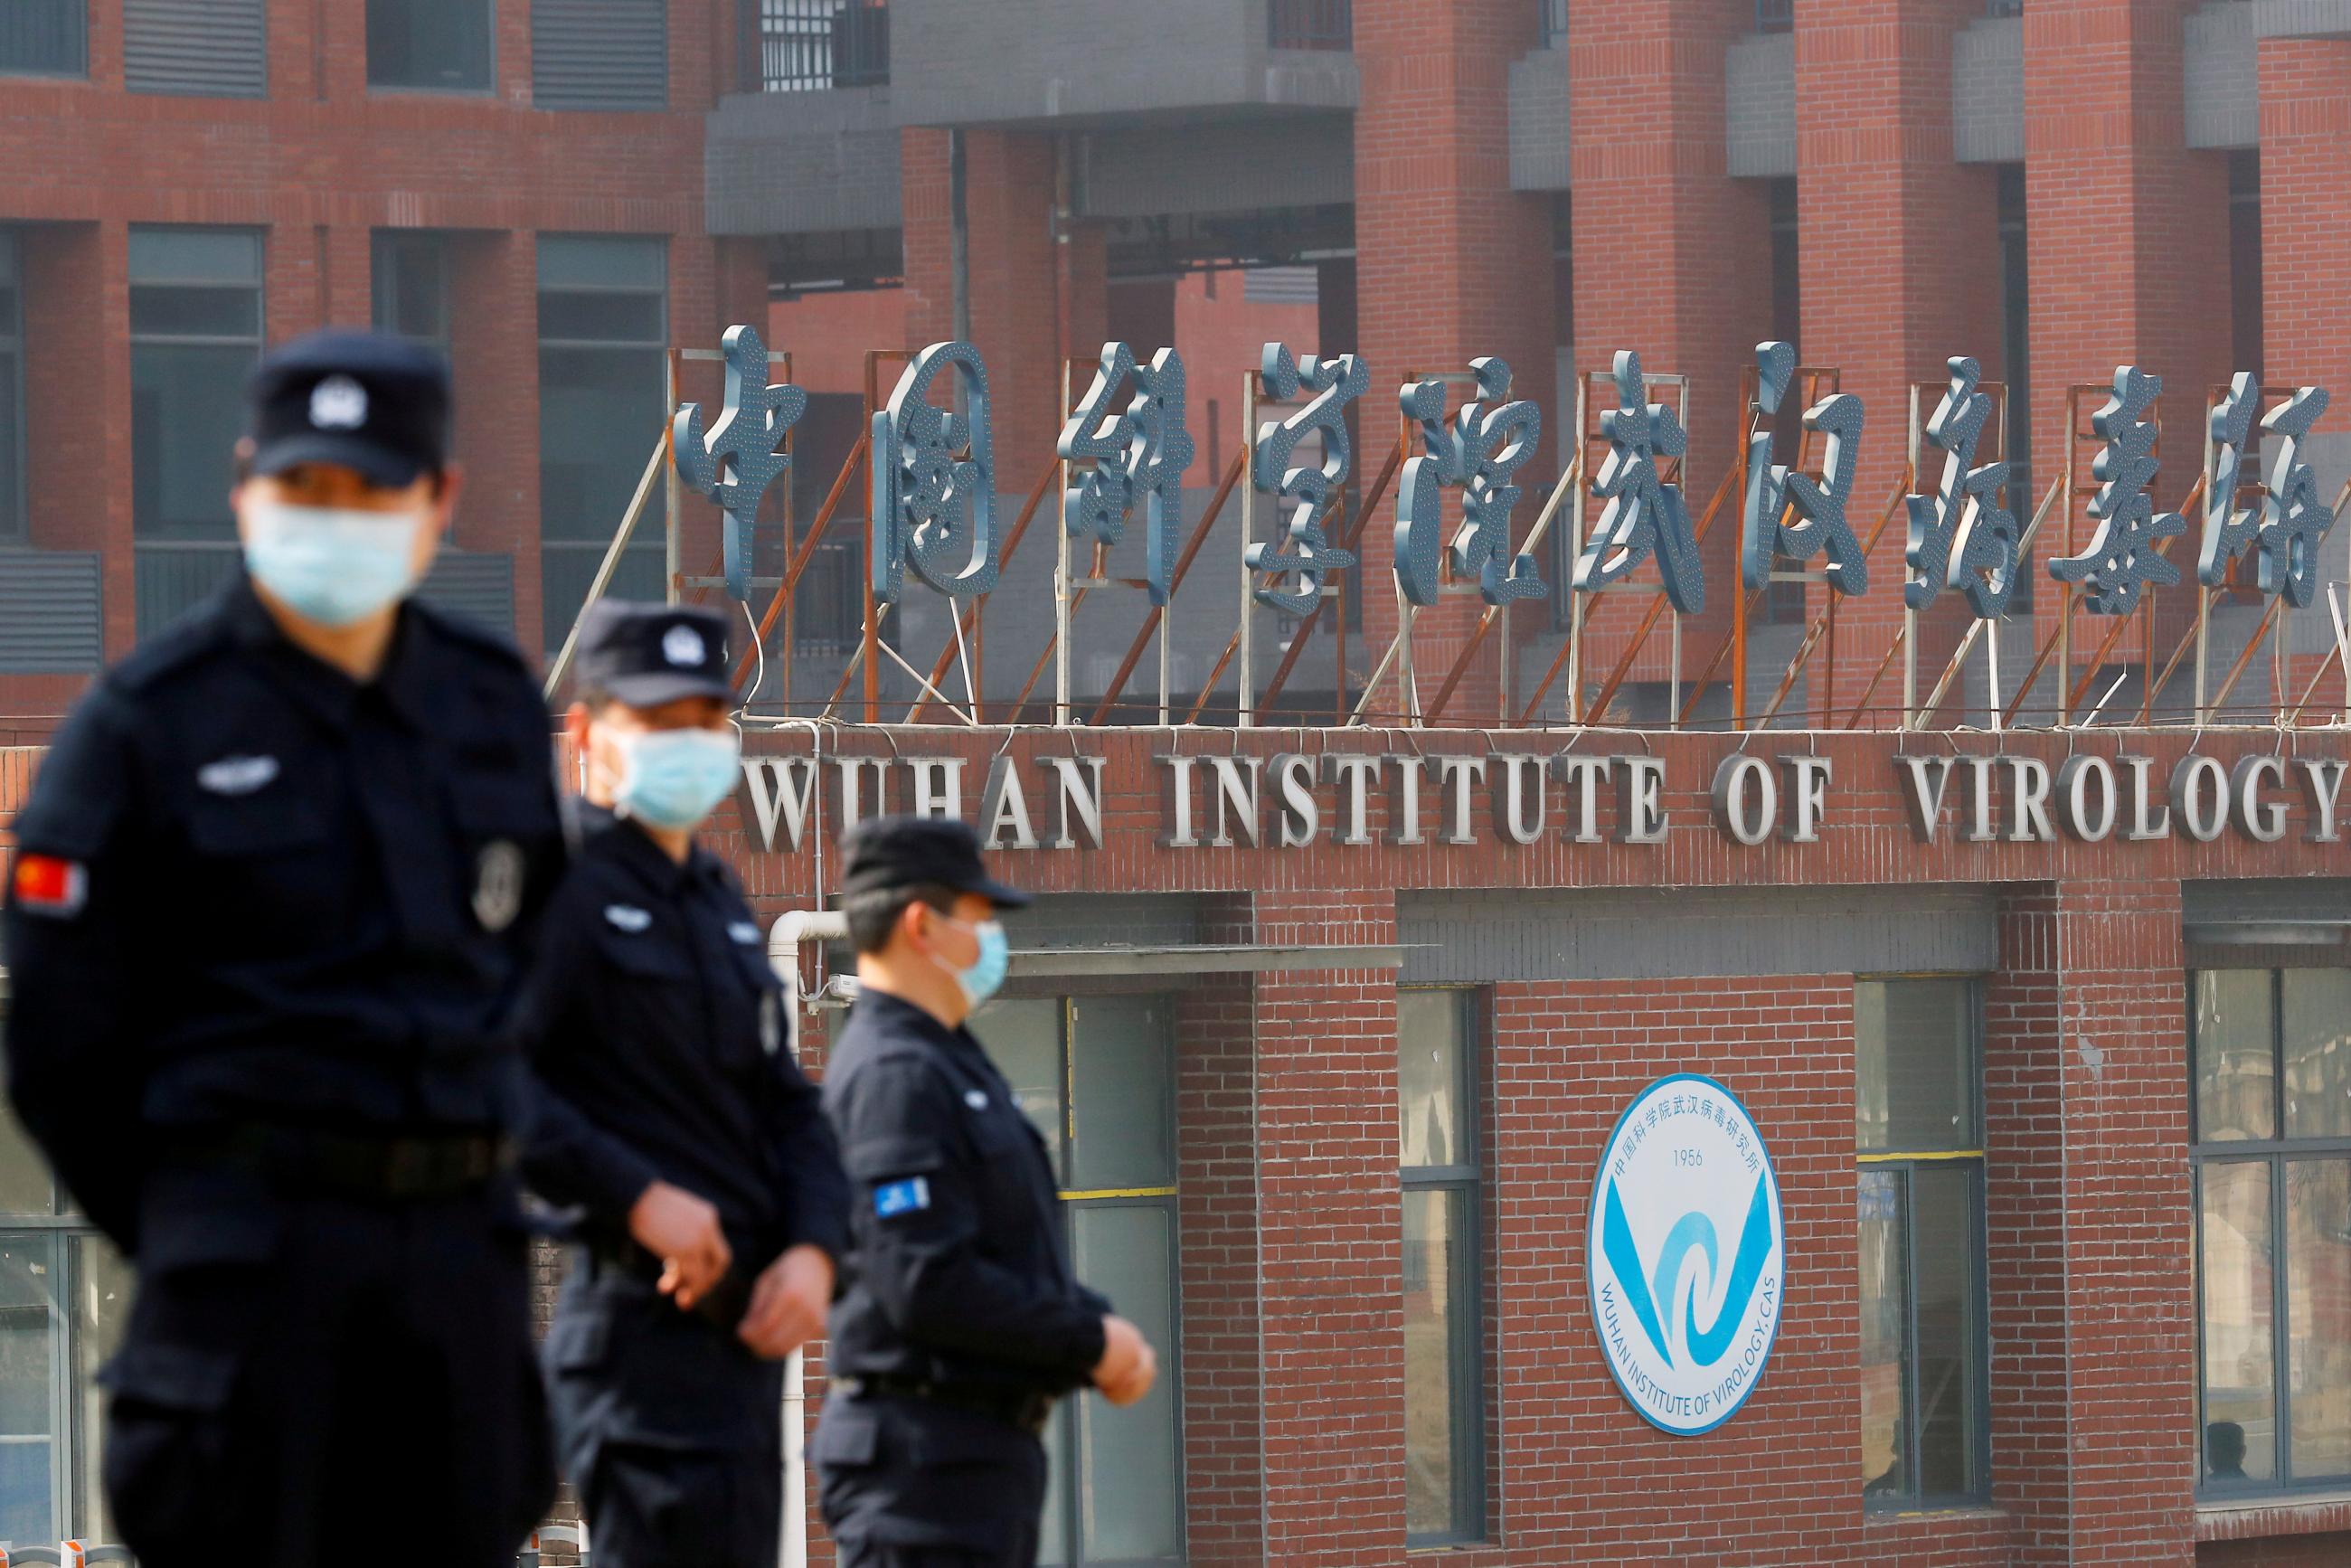 Security personnel keep watch outside the Wuhan Institute of Virology during the visit by the WHO team tasked with investigating the origins of COVID-19 in Wuhan, Hubei province, China on February 3.